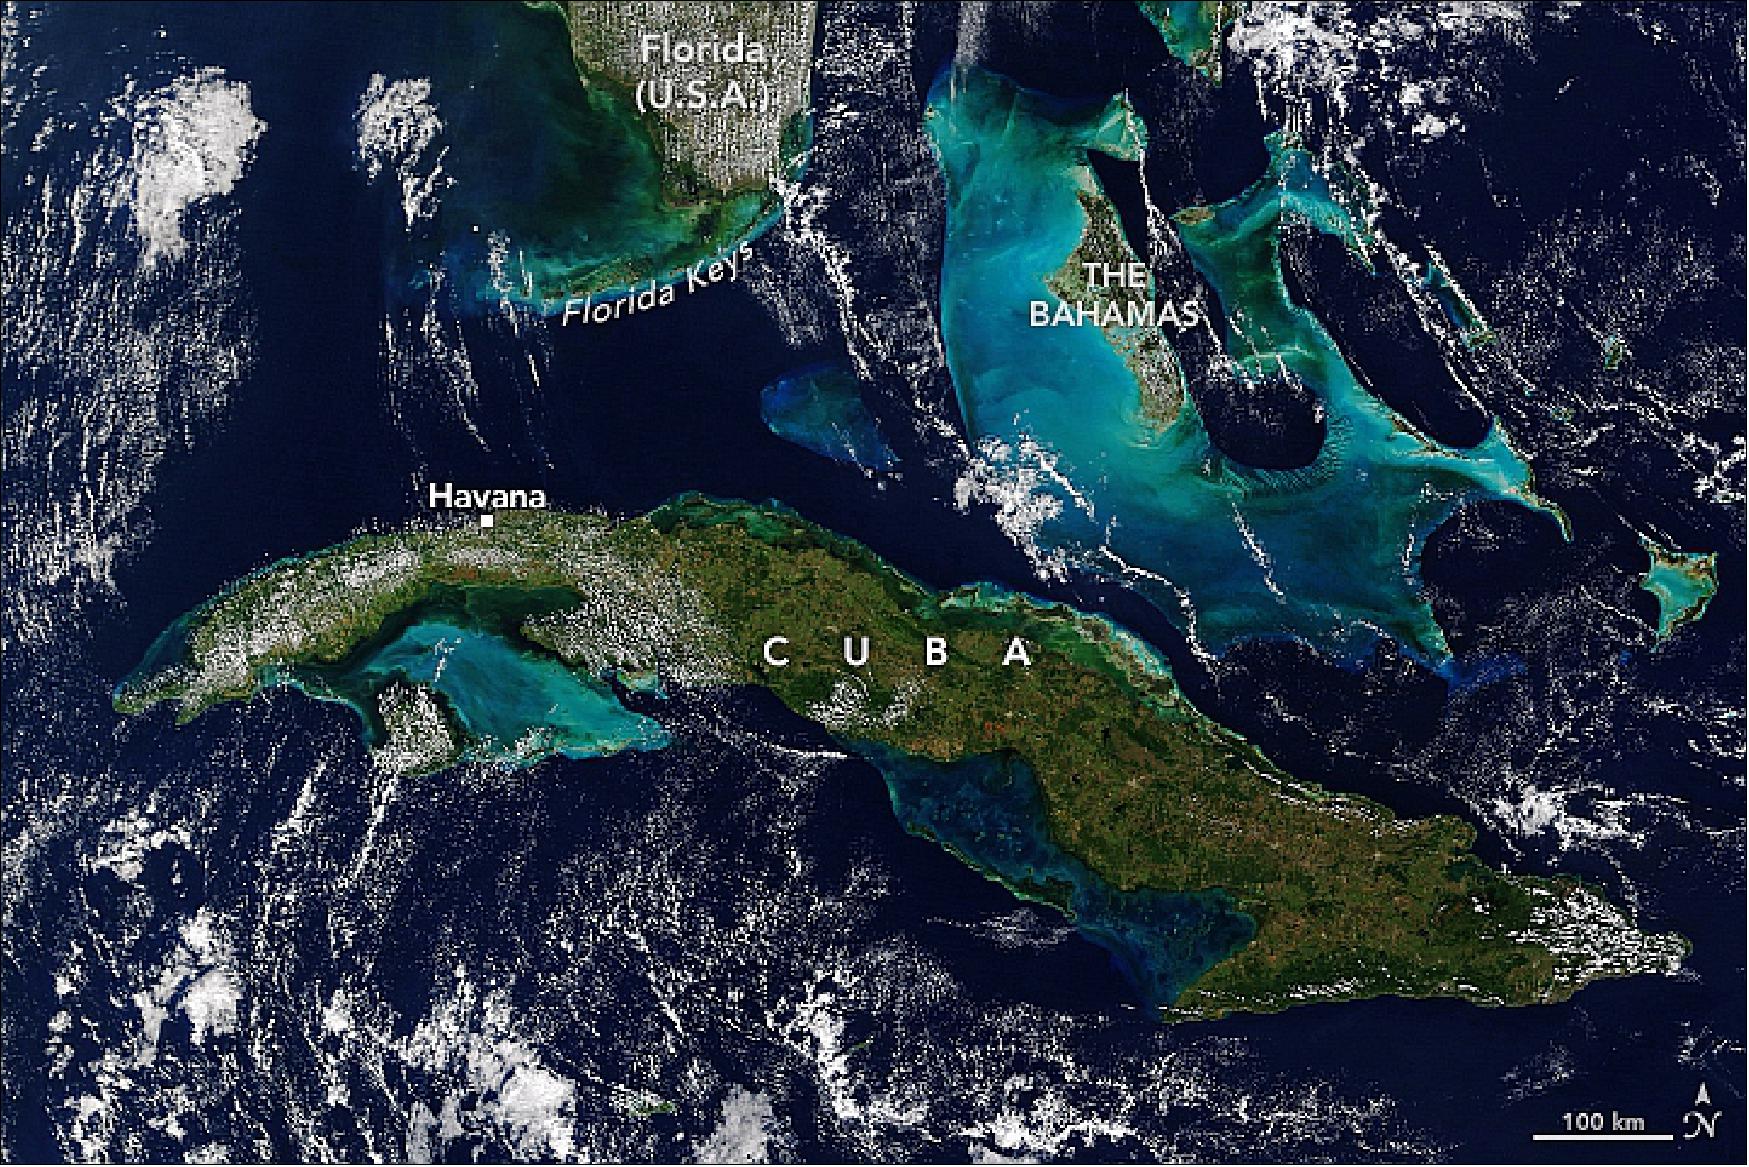 Figure 2: MODIS image of Cuba acquired on 2 December 2018. Civilization’s footprint on this Caribbean island has been relatively light (image credit: NASA Earth Observatory image by Joshua Stevens, using MODIS data from NASA EOSDIS/LANCE and GIBS/Worldview. Story by Adam Voiland)